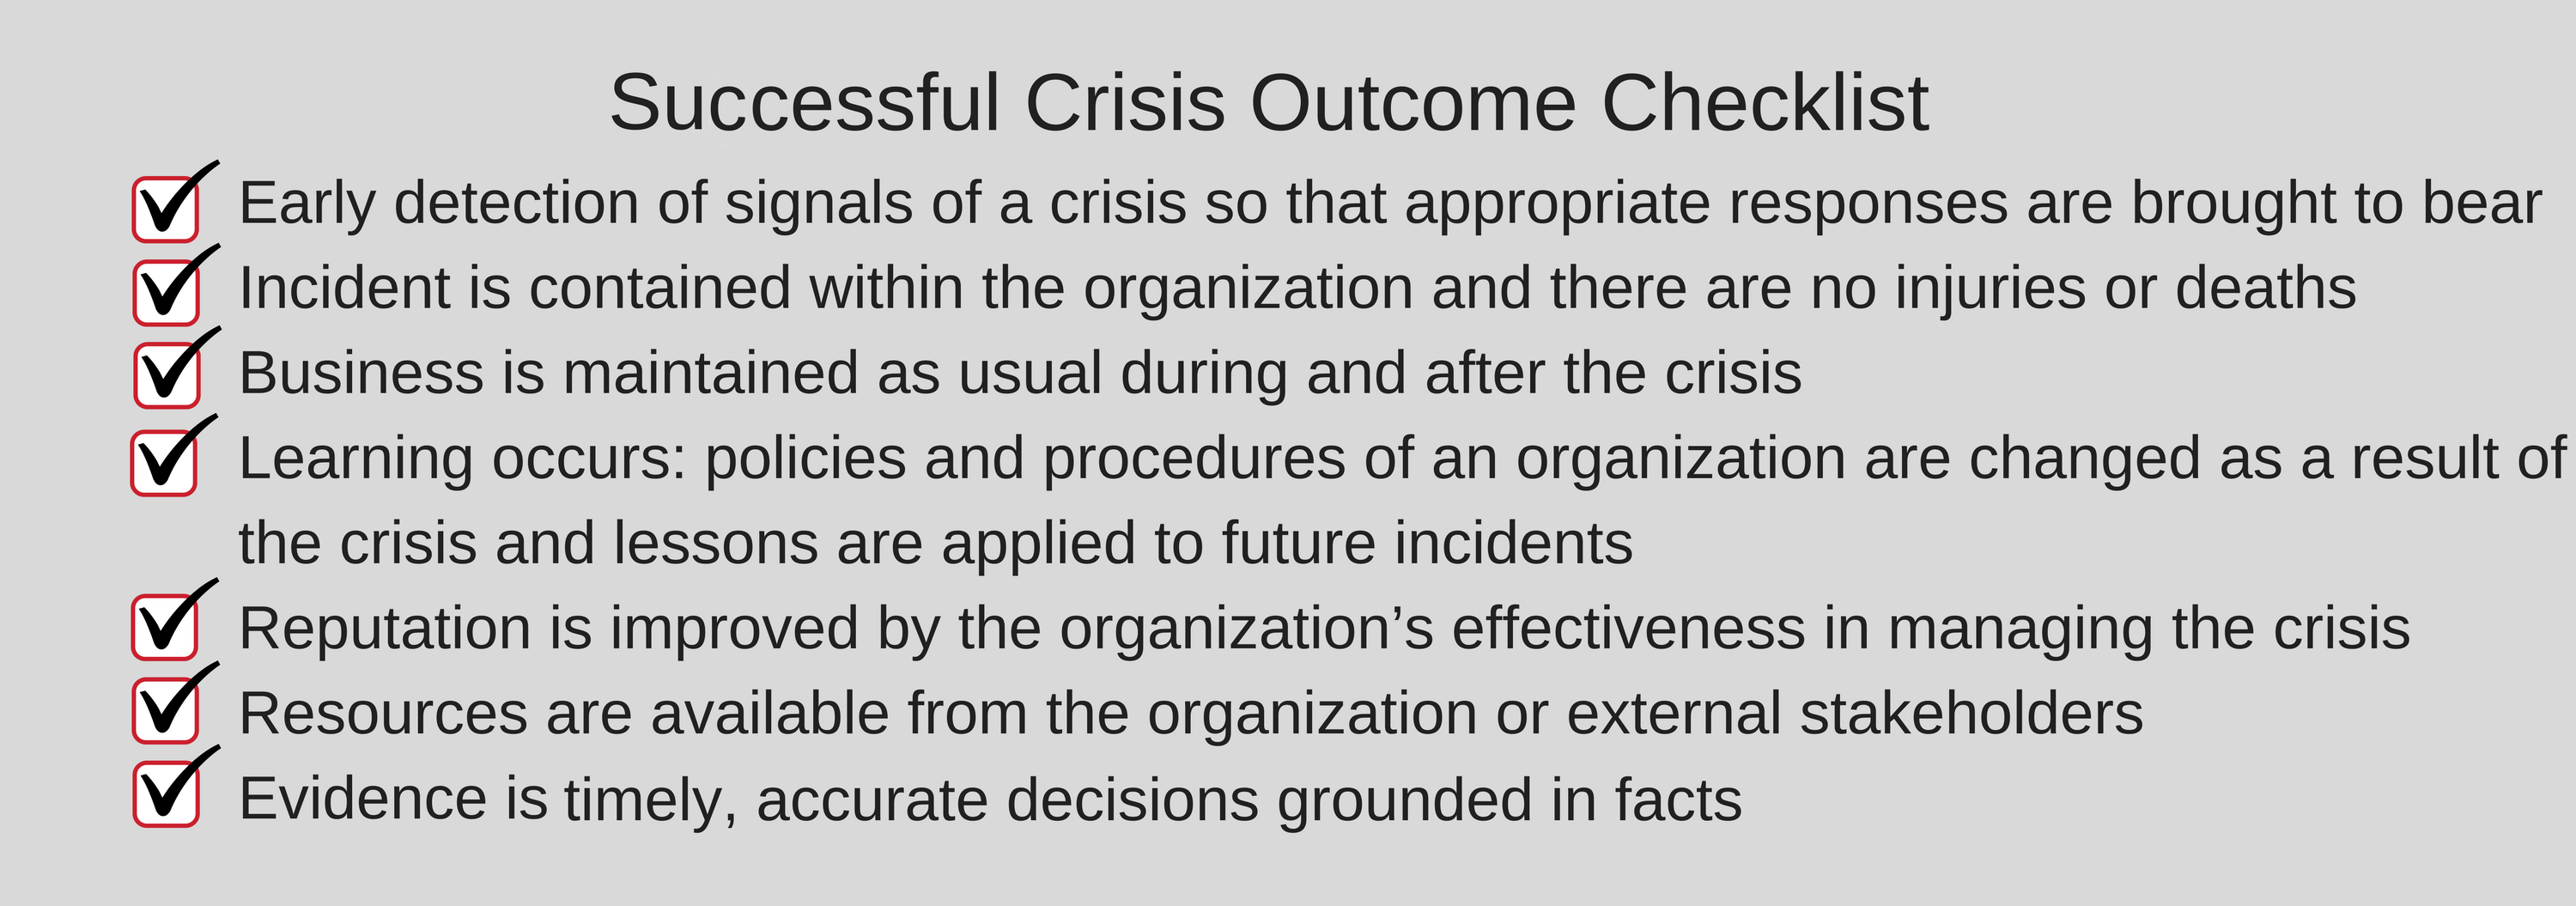 Lesson 1: Prominent Ethical Issues In Crisis Situations